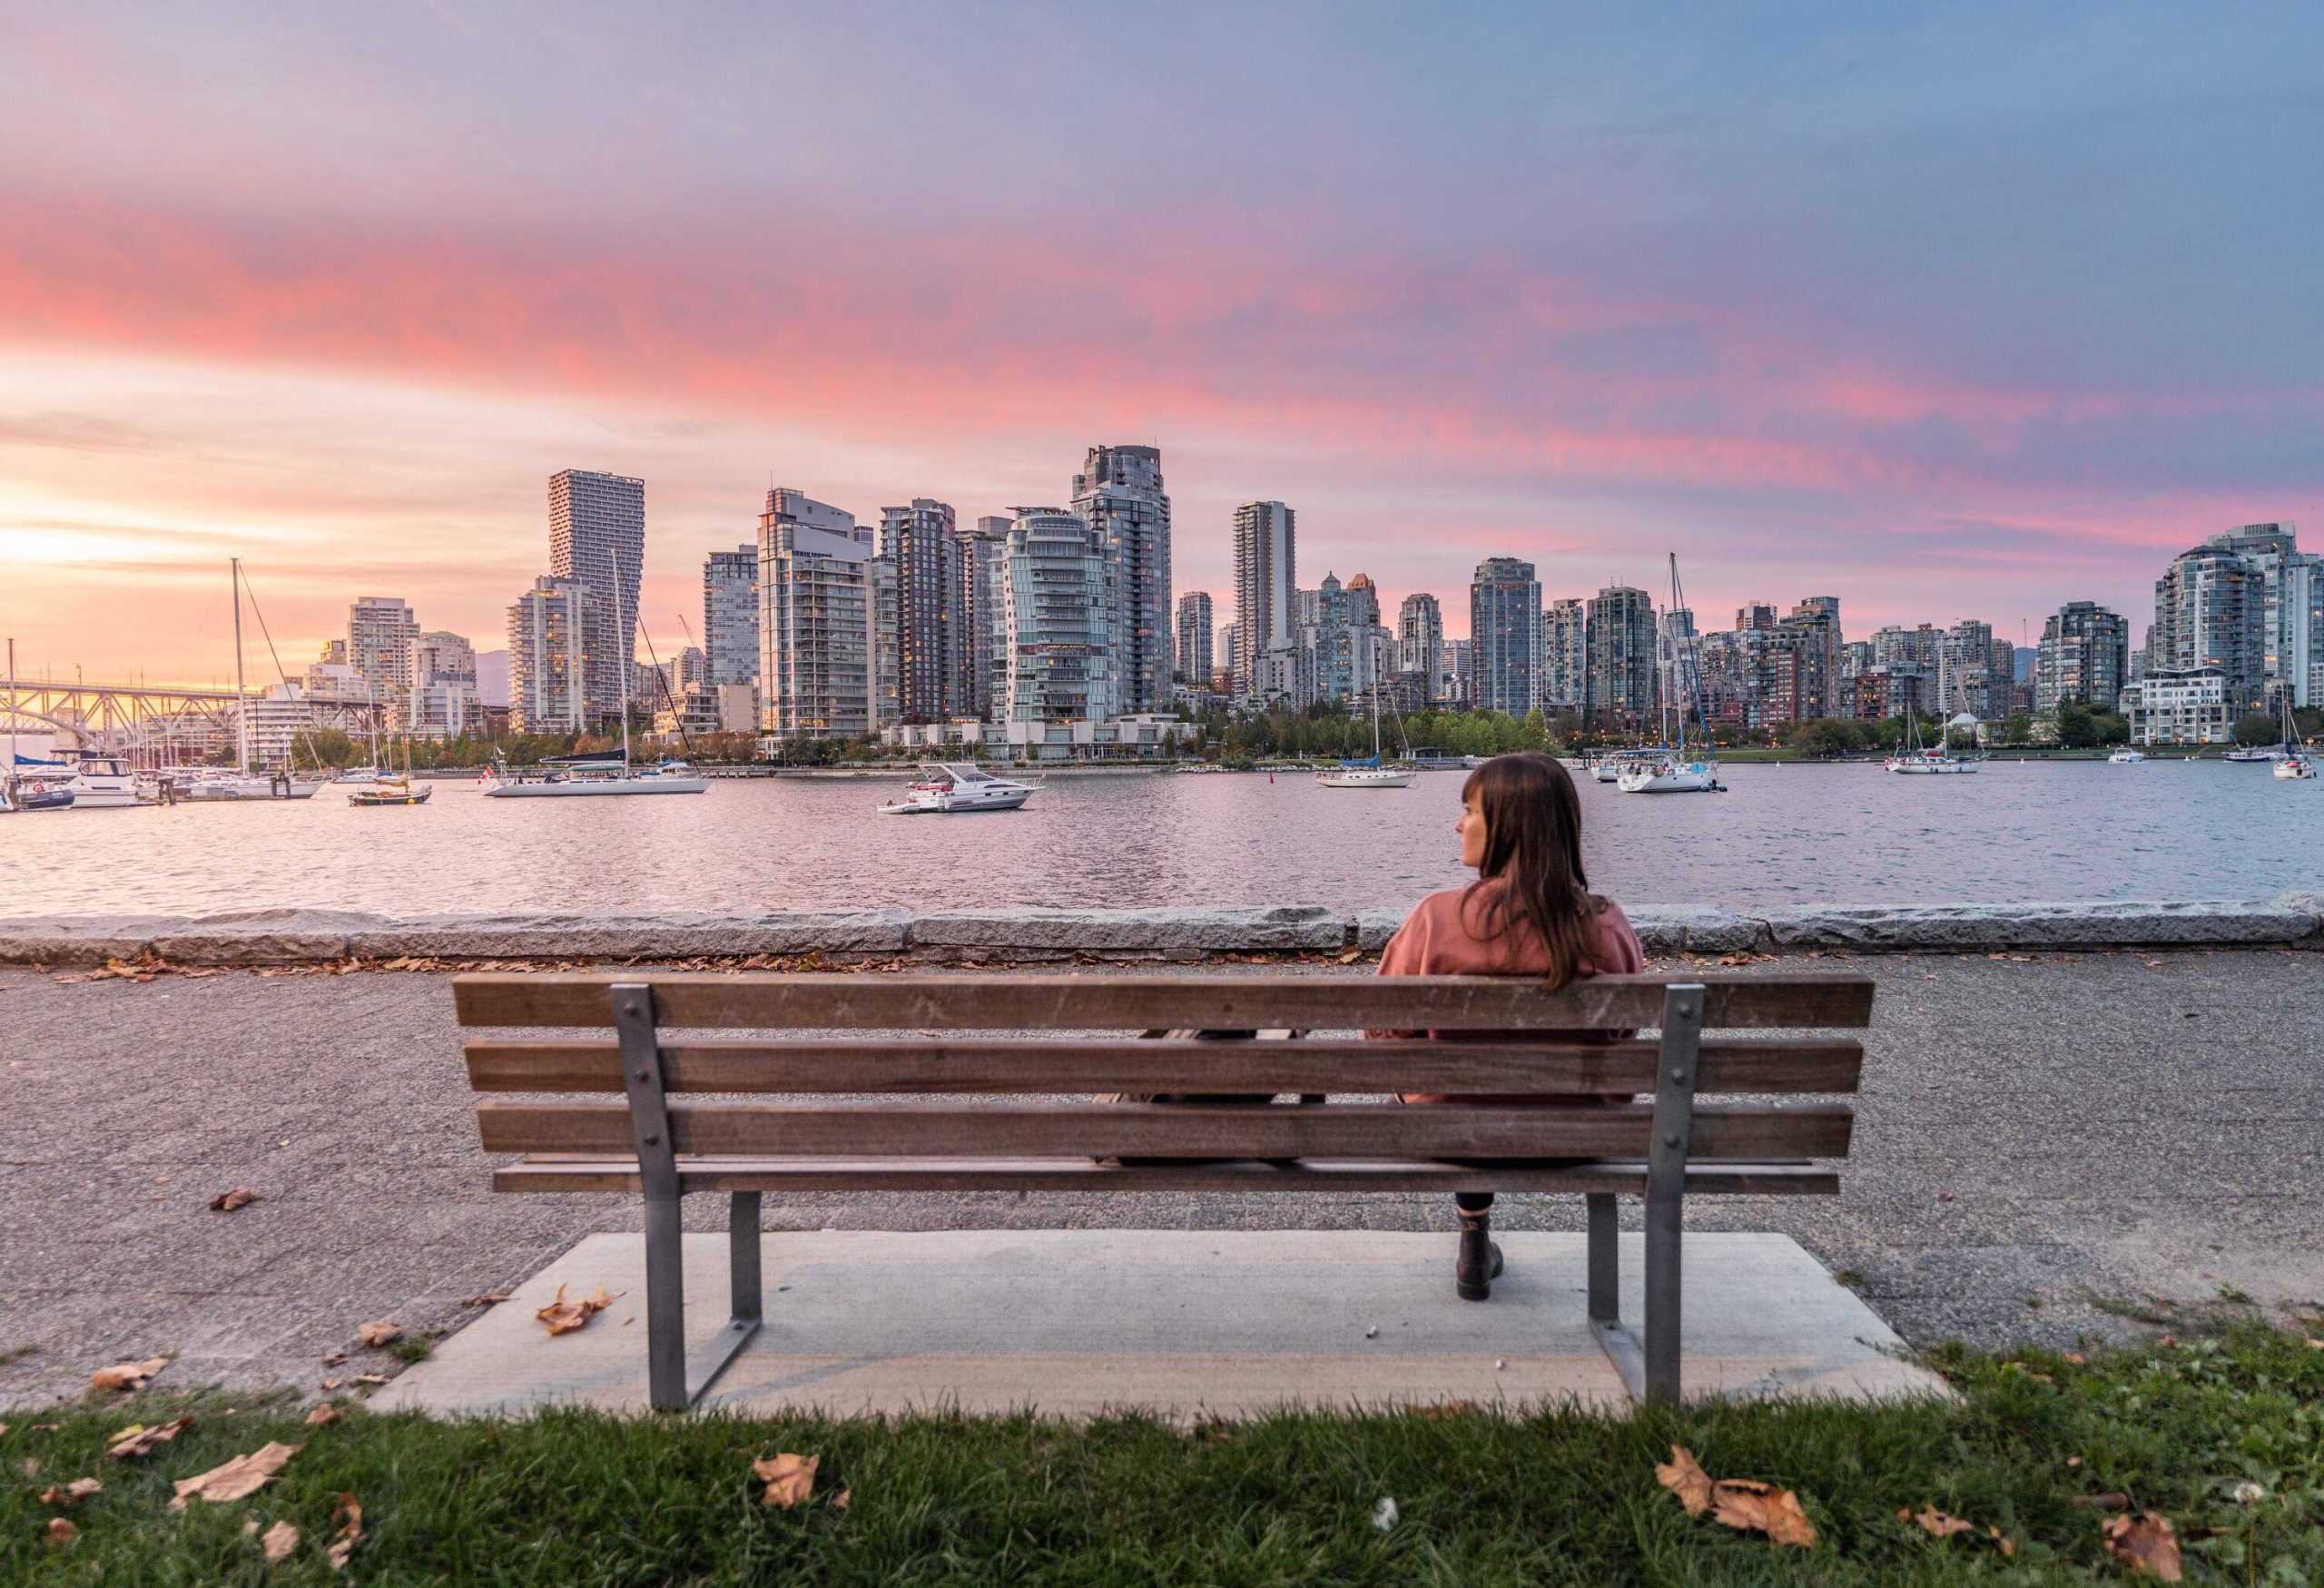 A woman sits on a bench in front of a harbour full of cruising boats with distant views of the city skyline.